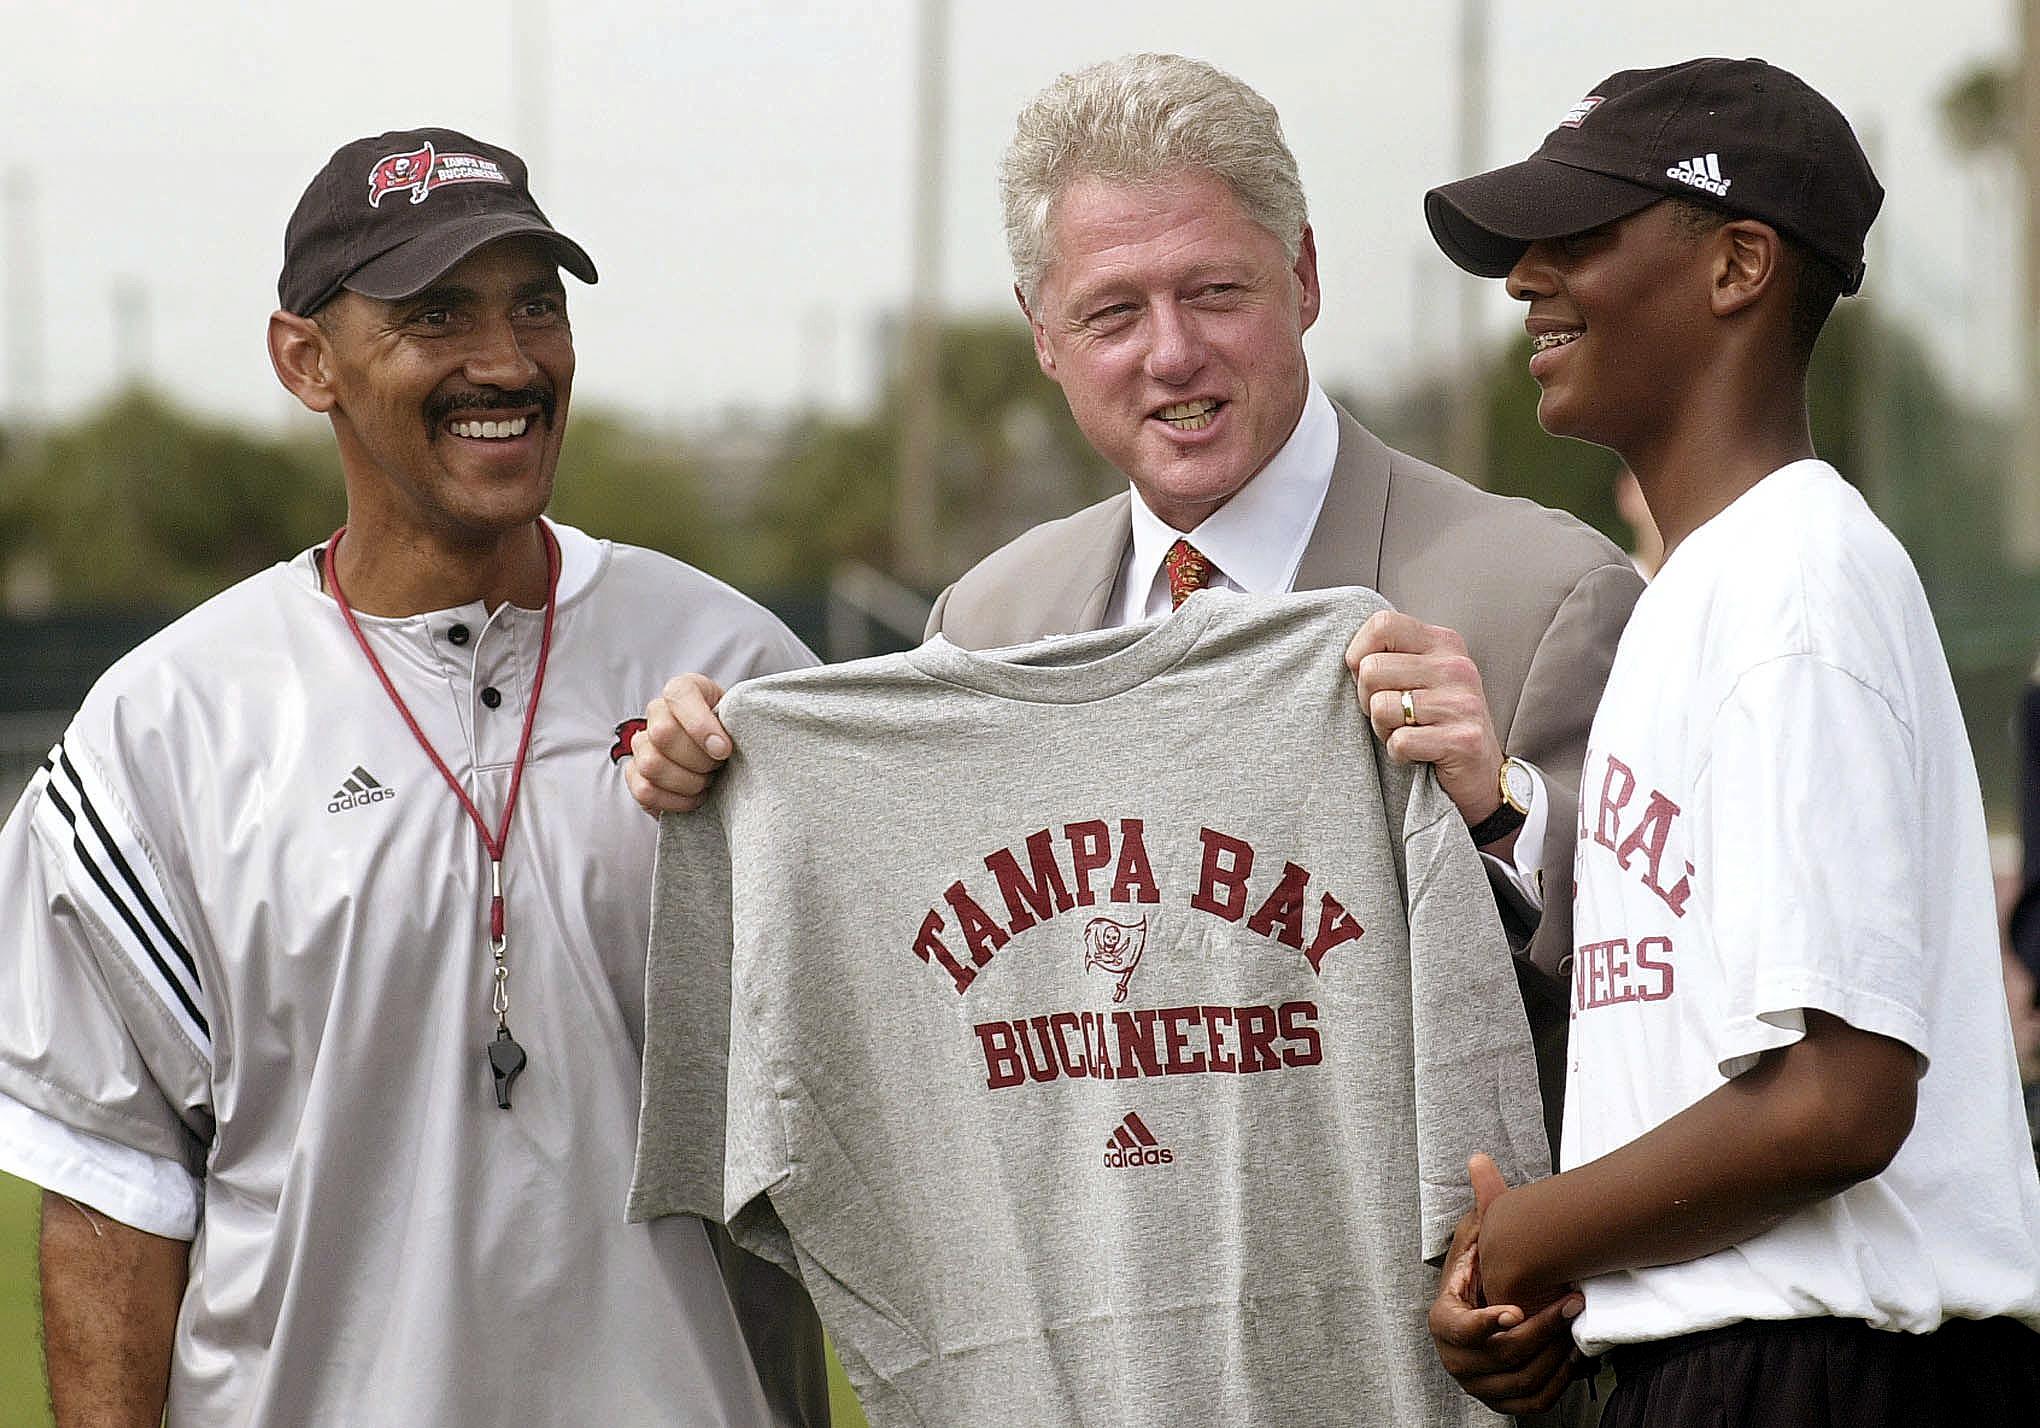 US President Bill Clinton with coach Tony Dungy and his son James, at the University of Tampa in 2000, in Tampa , Florida. | Source: Getty Images